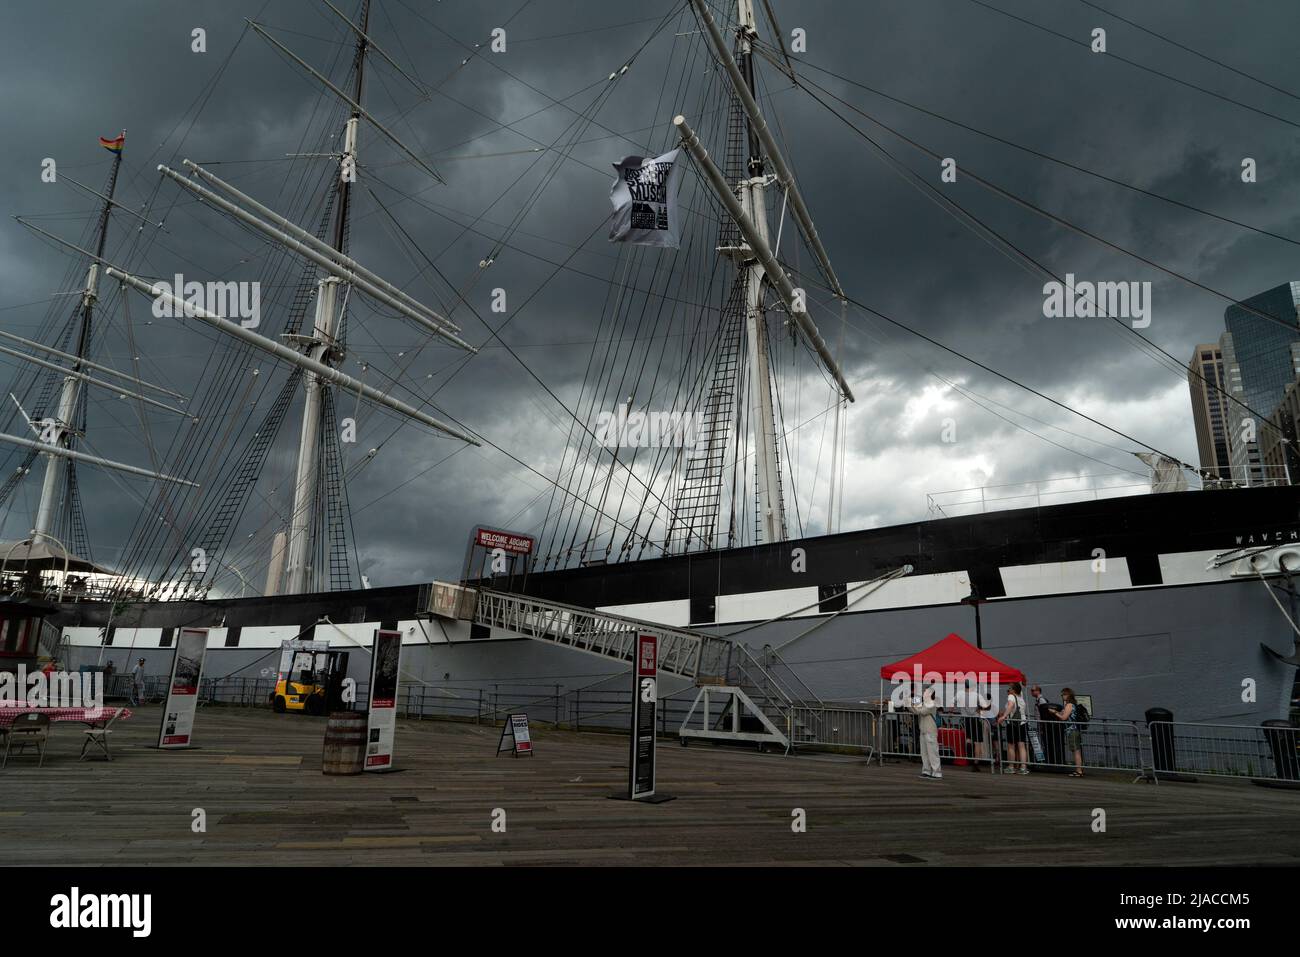 The South Street Seaport Museum's 1885 cargo ship Wavertree berthed on Pier 16 in the South Street Seaport with an impending thunderstorm. Stock Photo